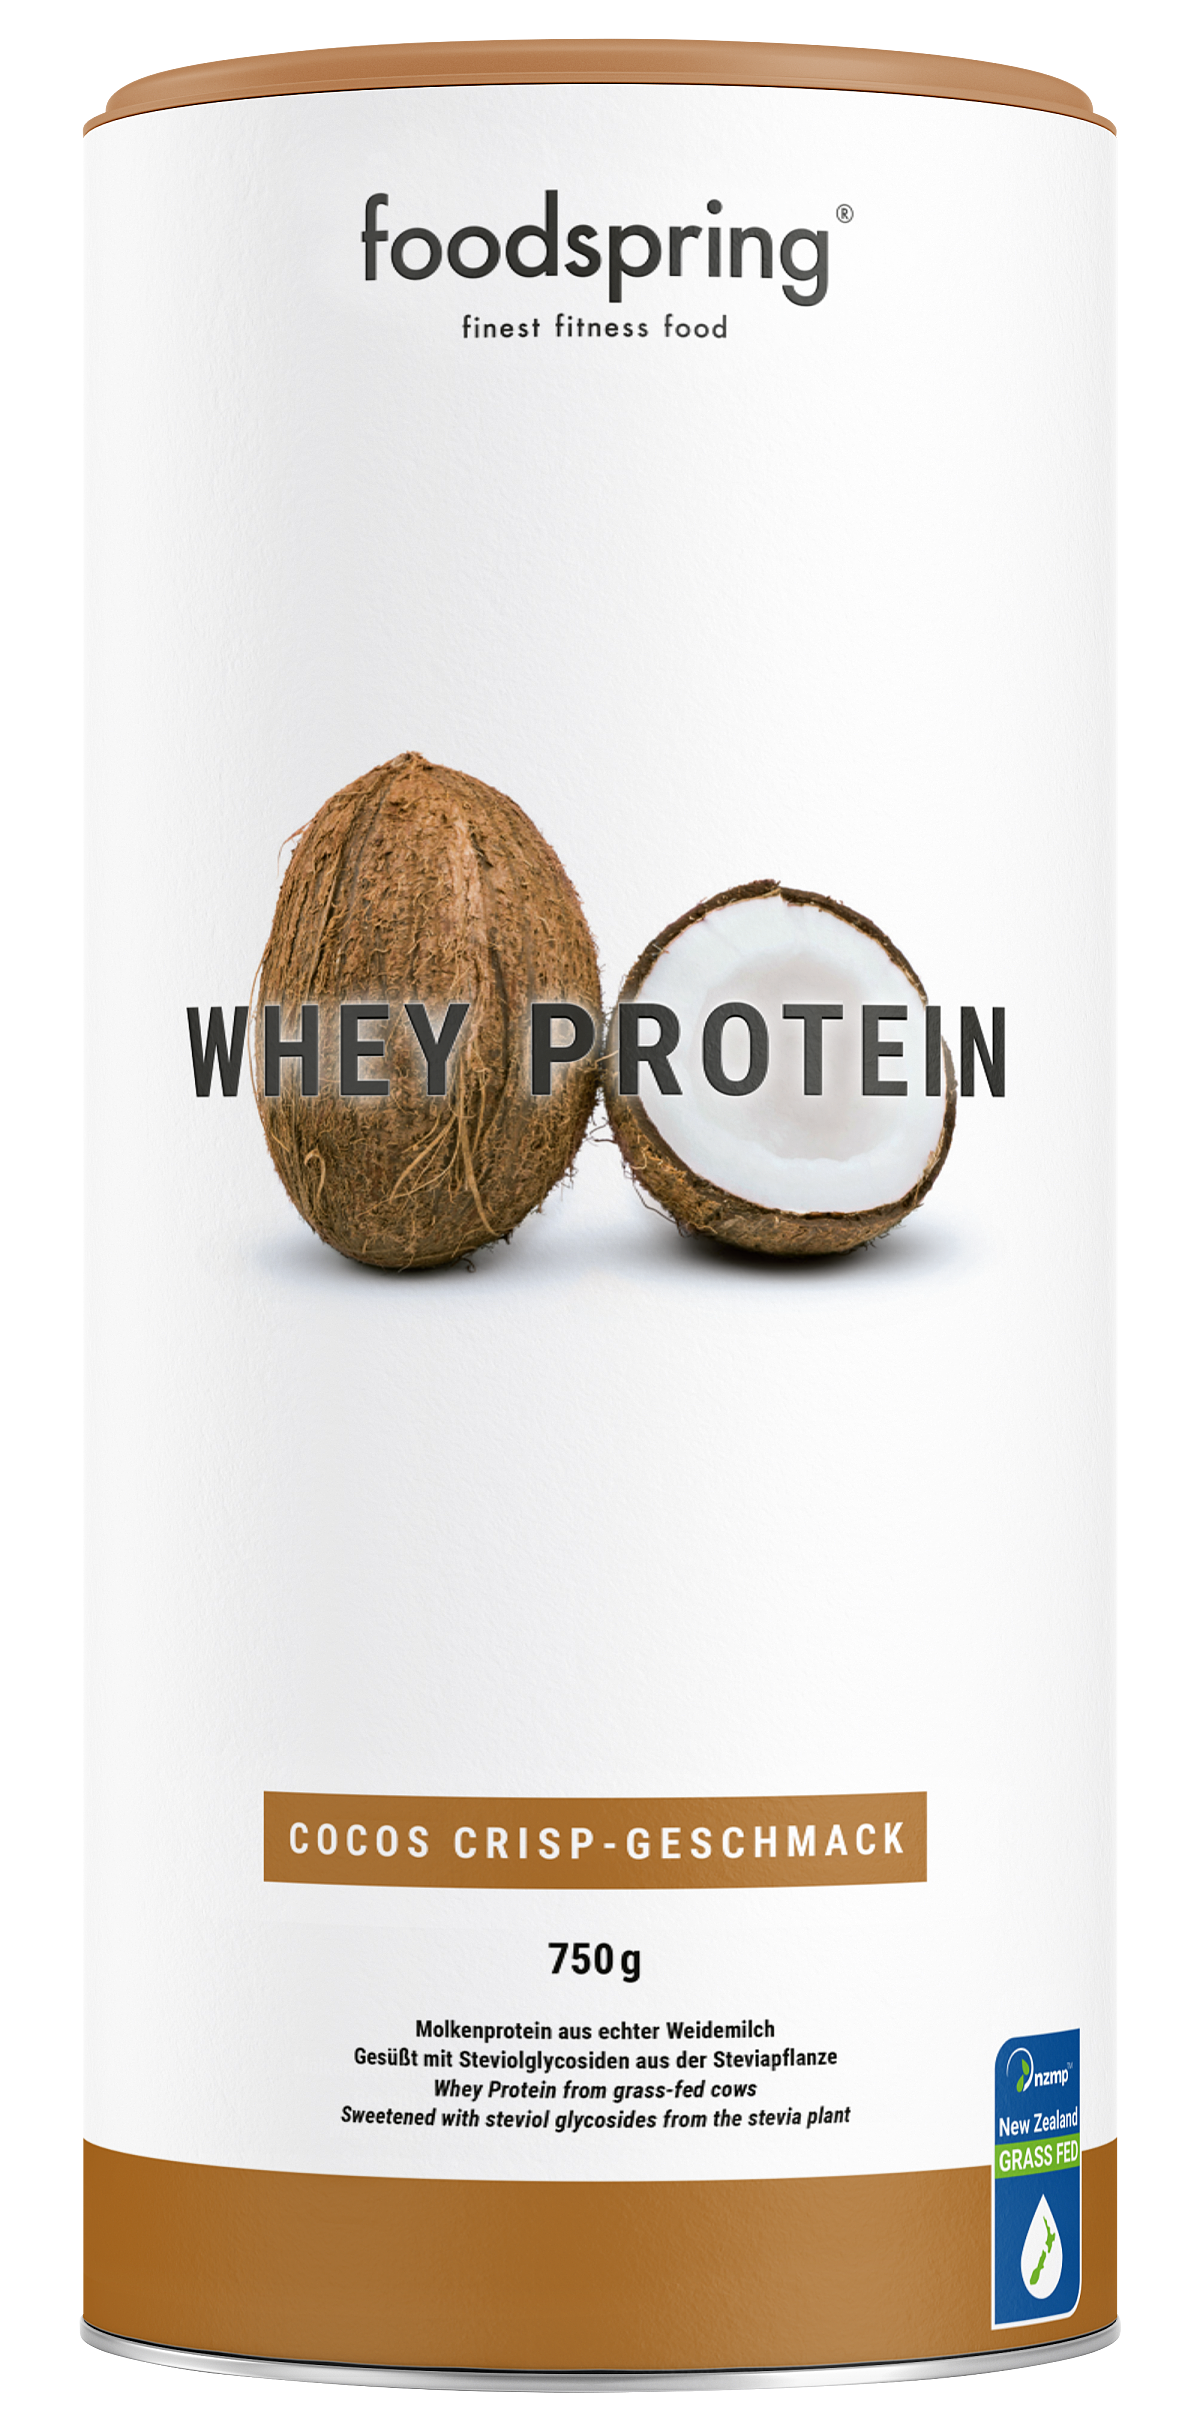 foodspring_Whey Protein Coconut Crisp_34,99_04